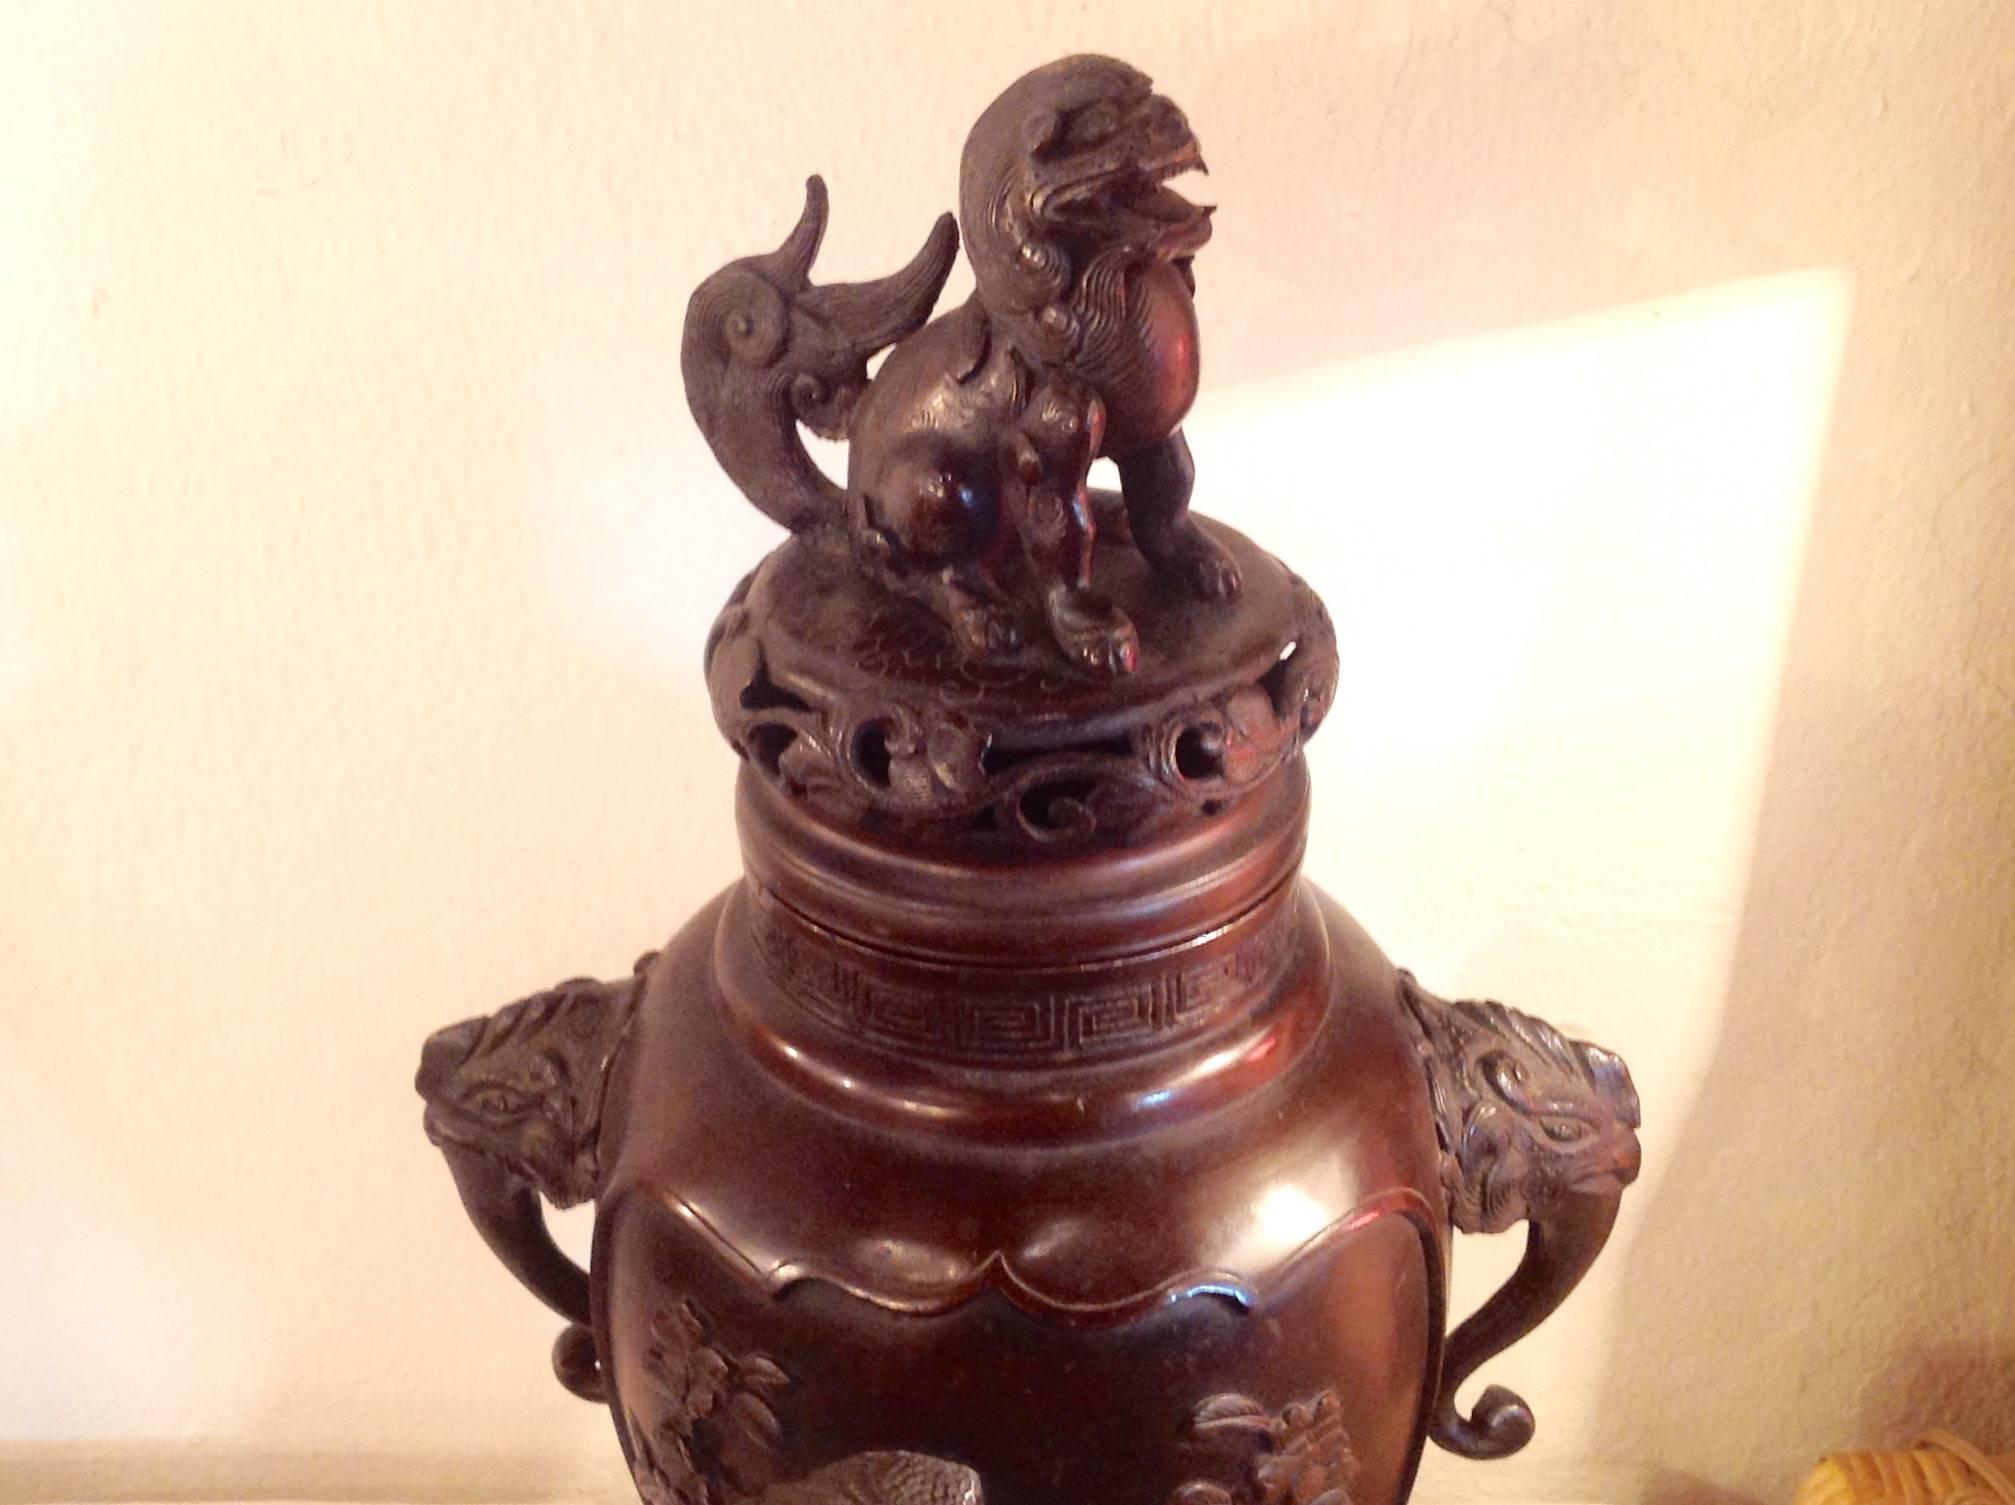 Asian bronze urn or censer, handcrafted with hidden art on inside of bottom base, symbols on border of base, measures 19 inches high and 10 inches wide.